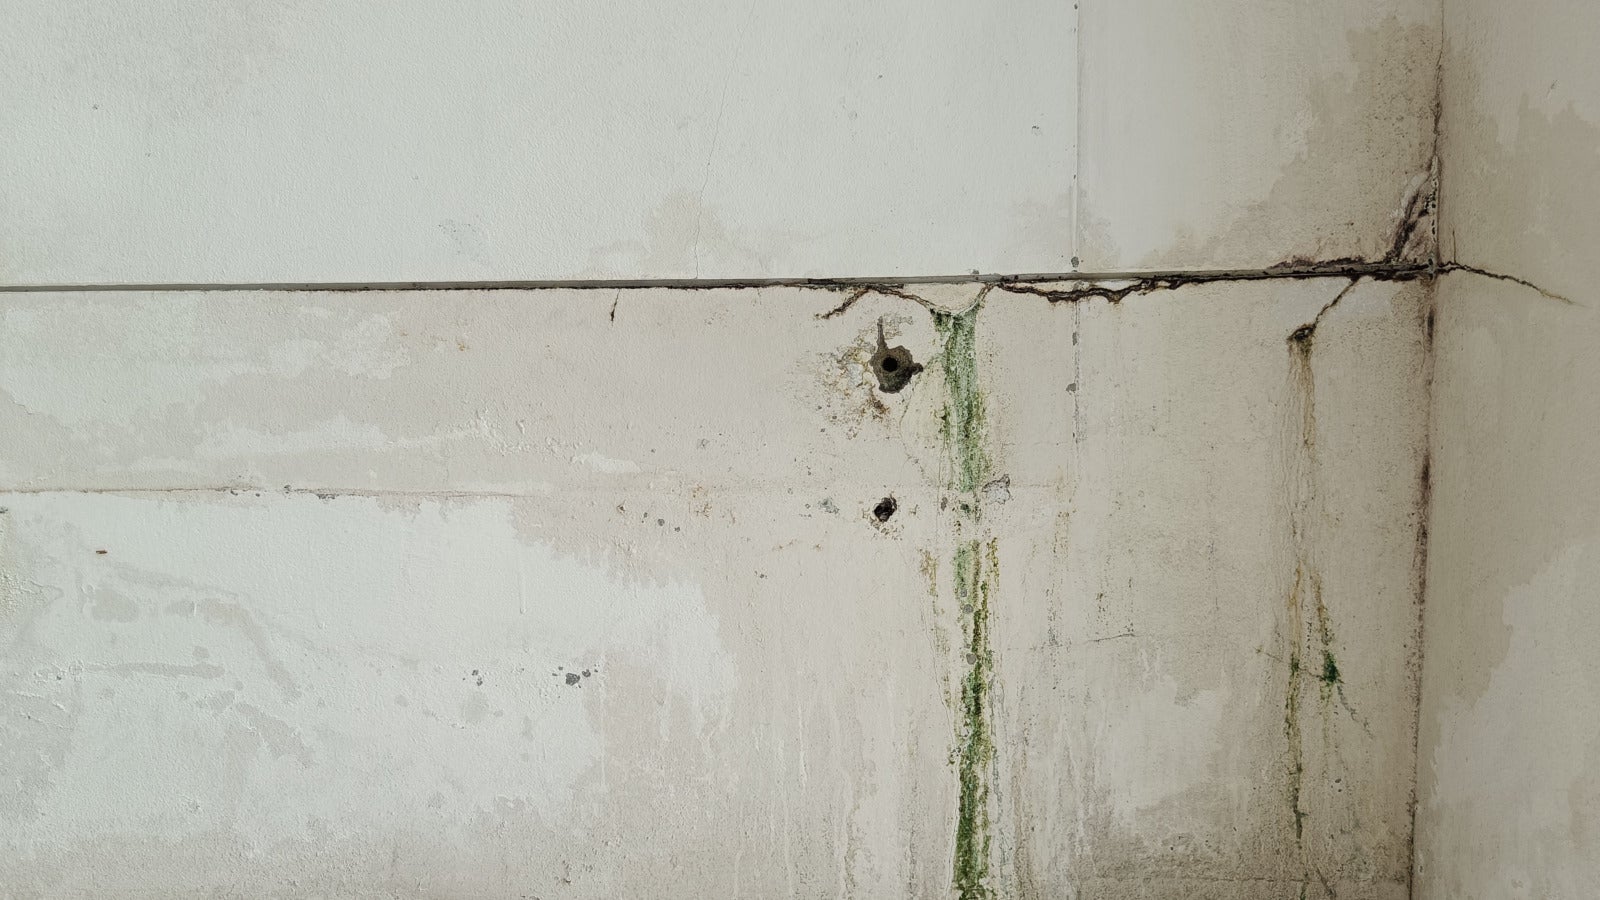 vecteezy image of the cracks mold on the wall 6667432 13